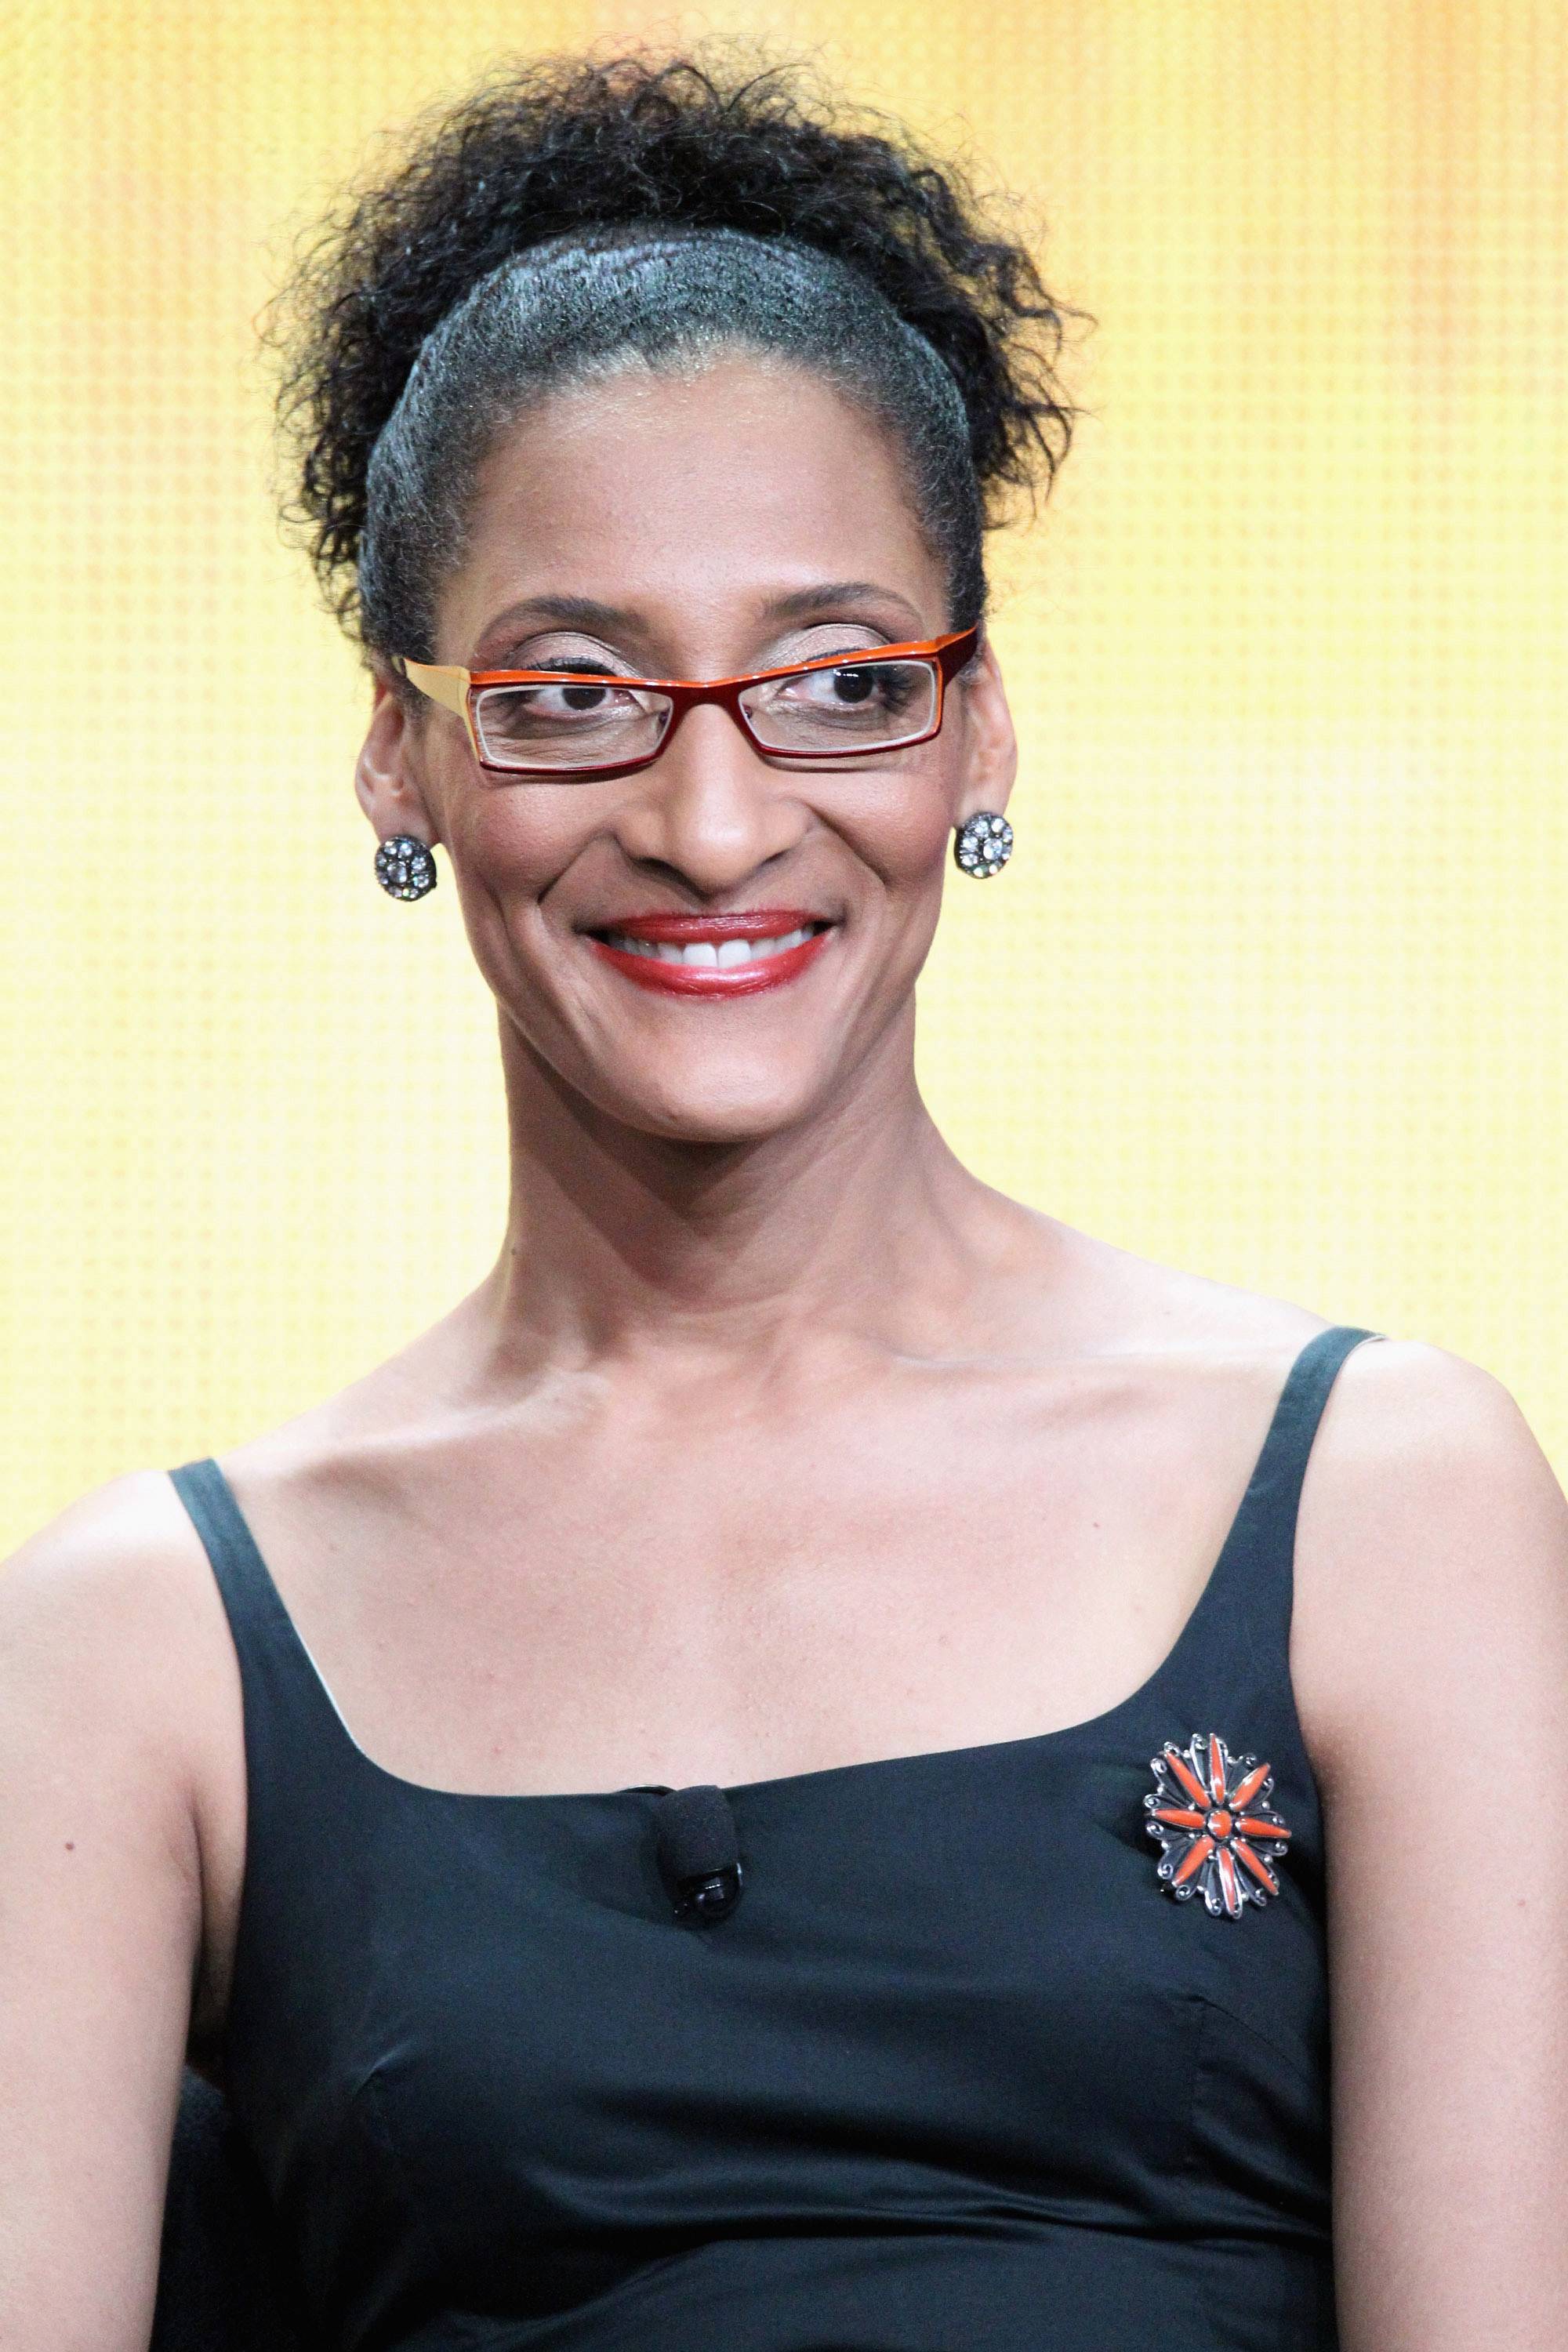 Carla Hall - Top Chef fan favorite Carla Hall is back on television as one of the five co-hosts of ABC’s The Chew, the first one-hour daily network show on all things food.(Photo: Frederick M. Brown/Getty Images)